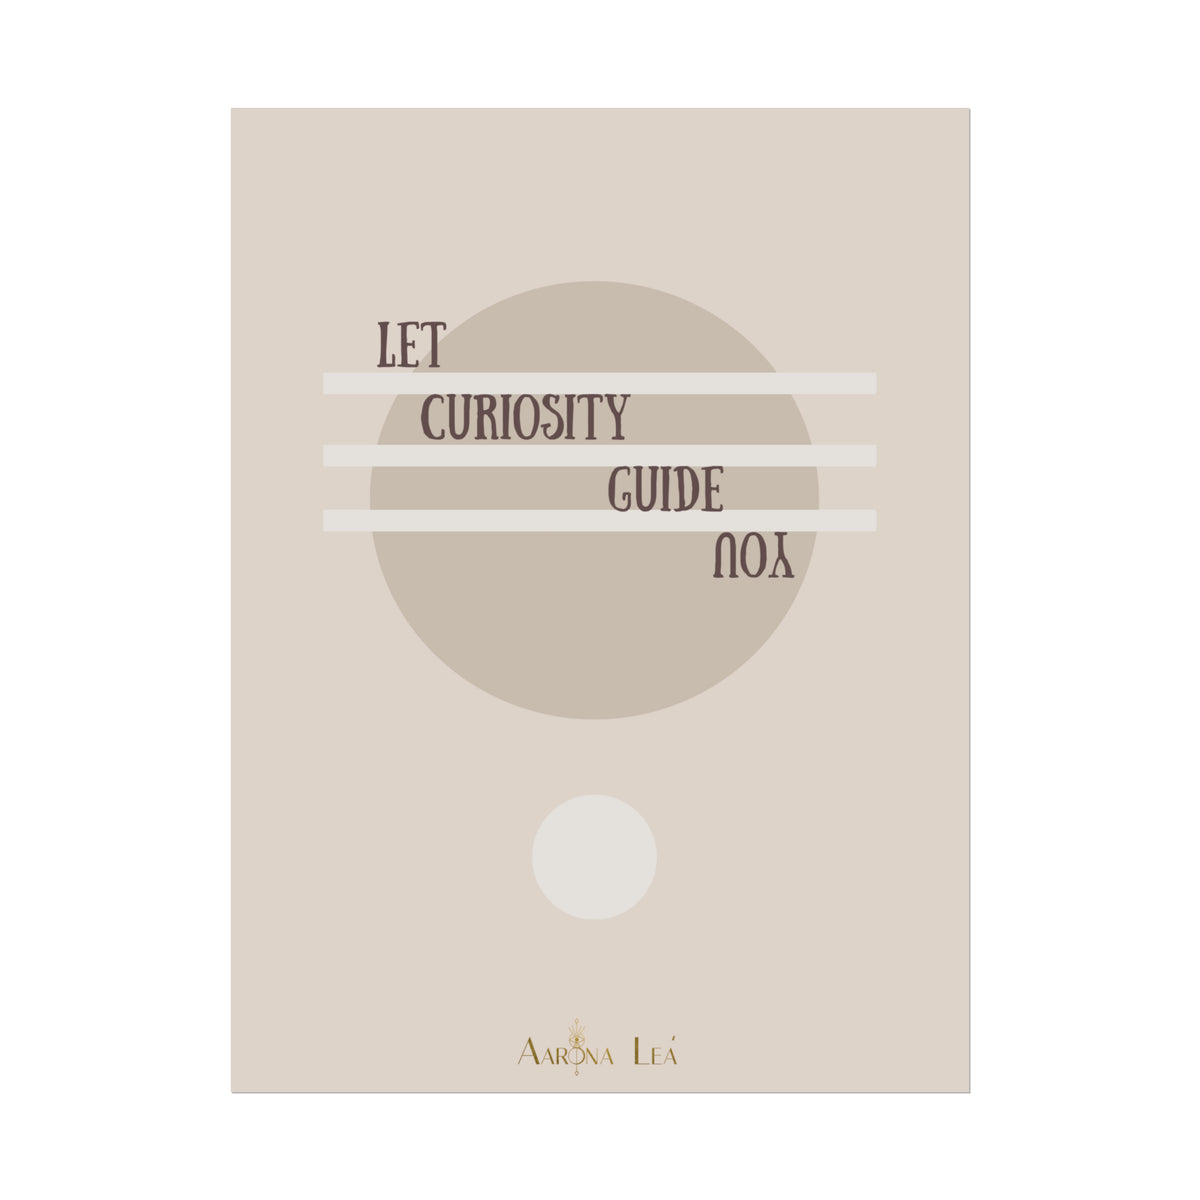 GUIDED BY CURIOSITY